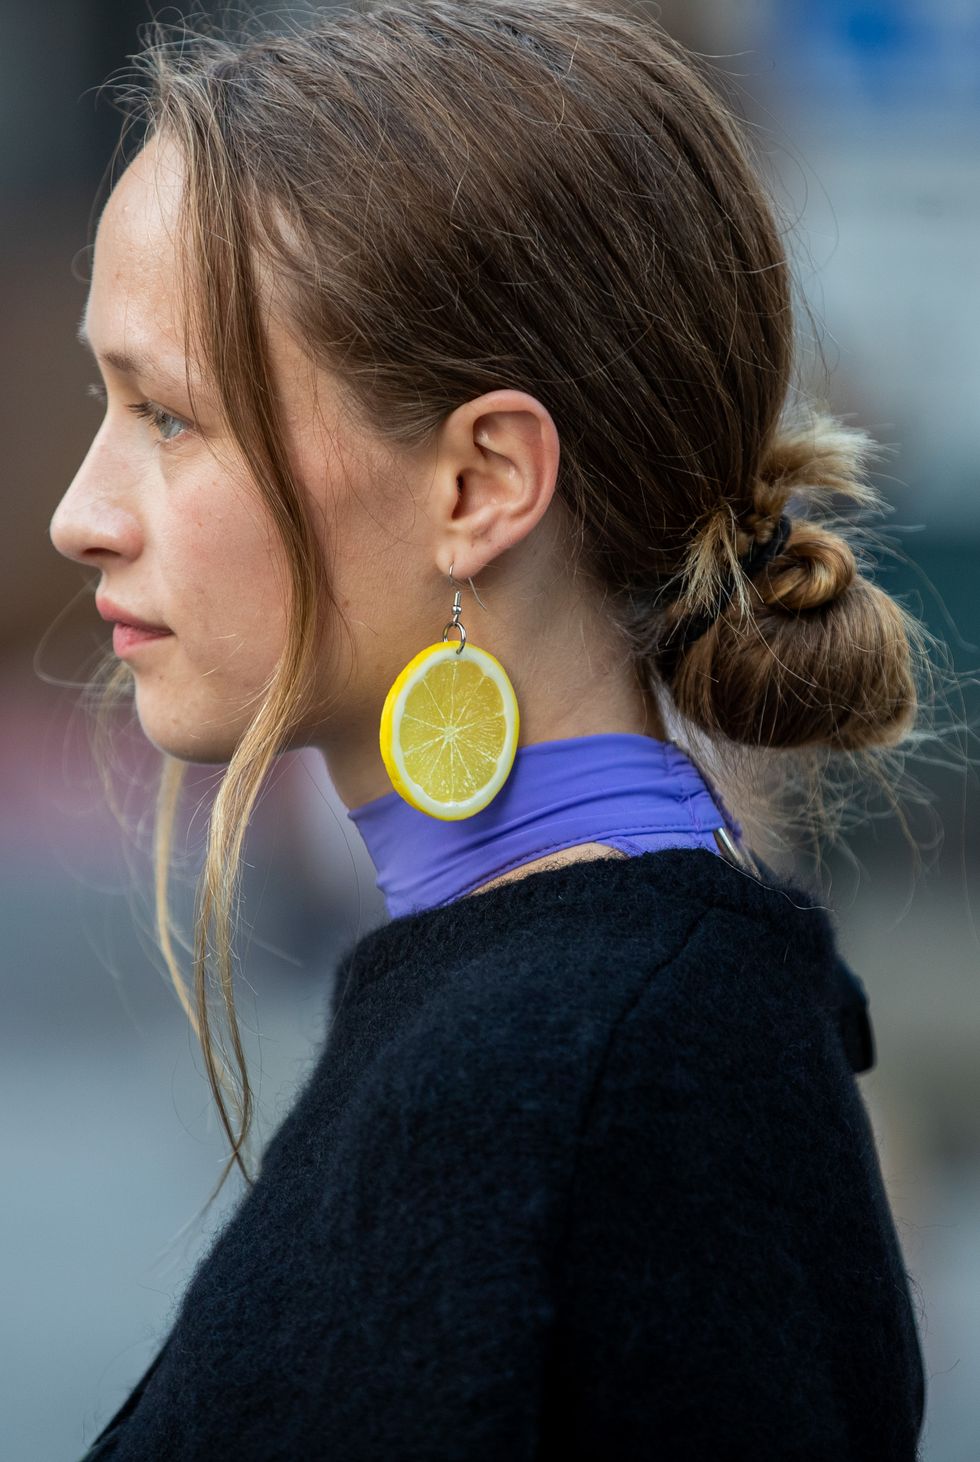 8 Coolest 2020 Jewelry Trends for Stylish Teens